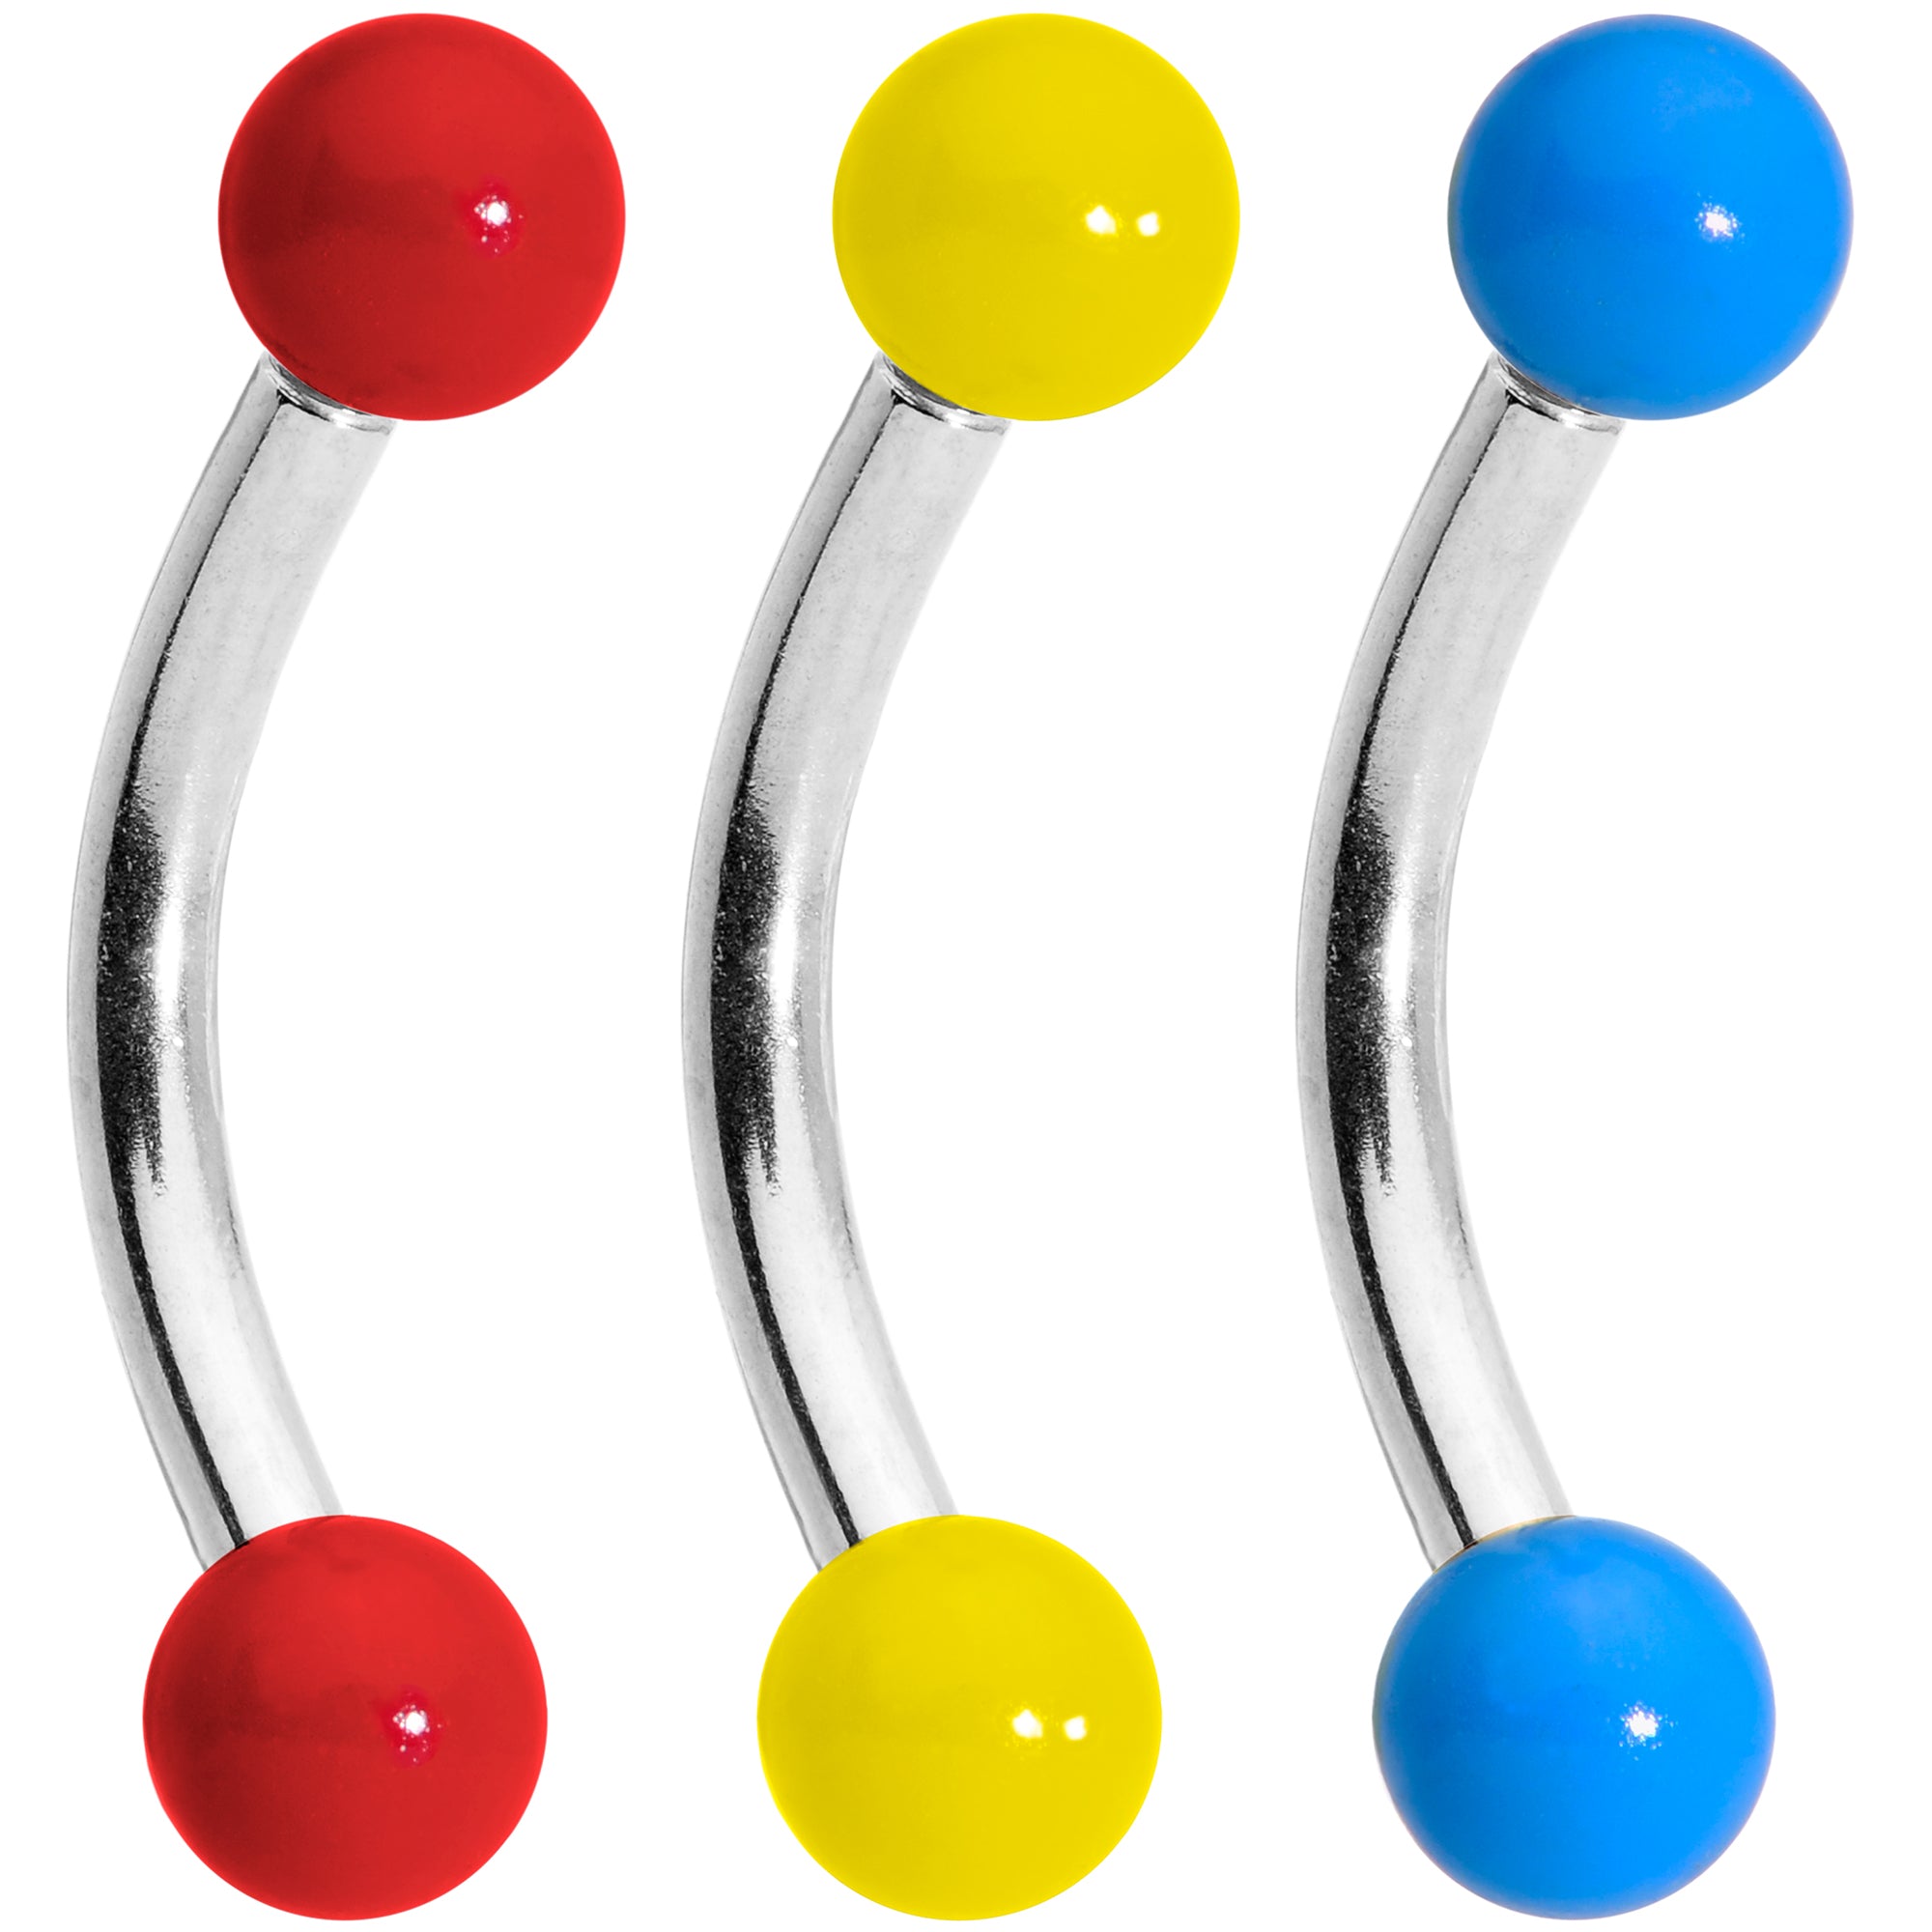 16 Gauge 5/16 Red Yellow Blue Glow in the Dark Curved Barbell Set of 3